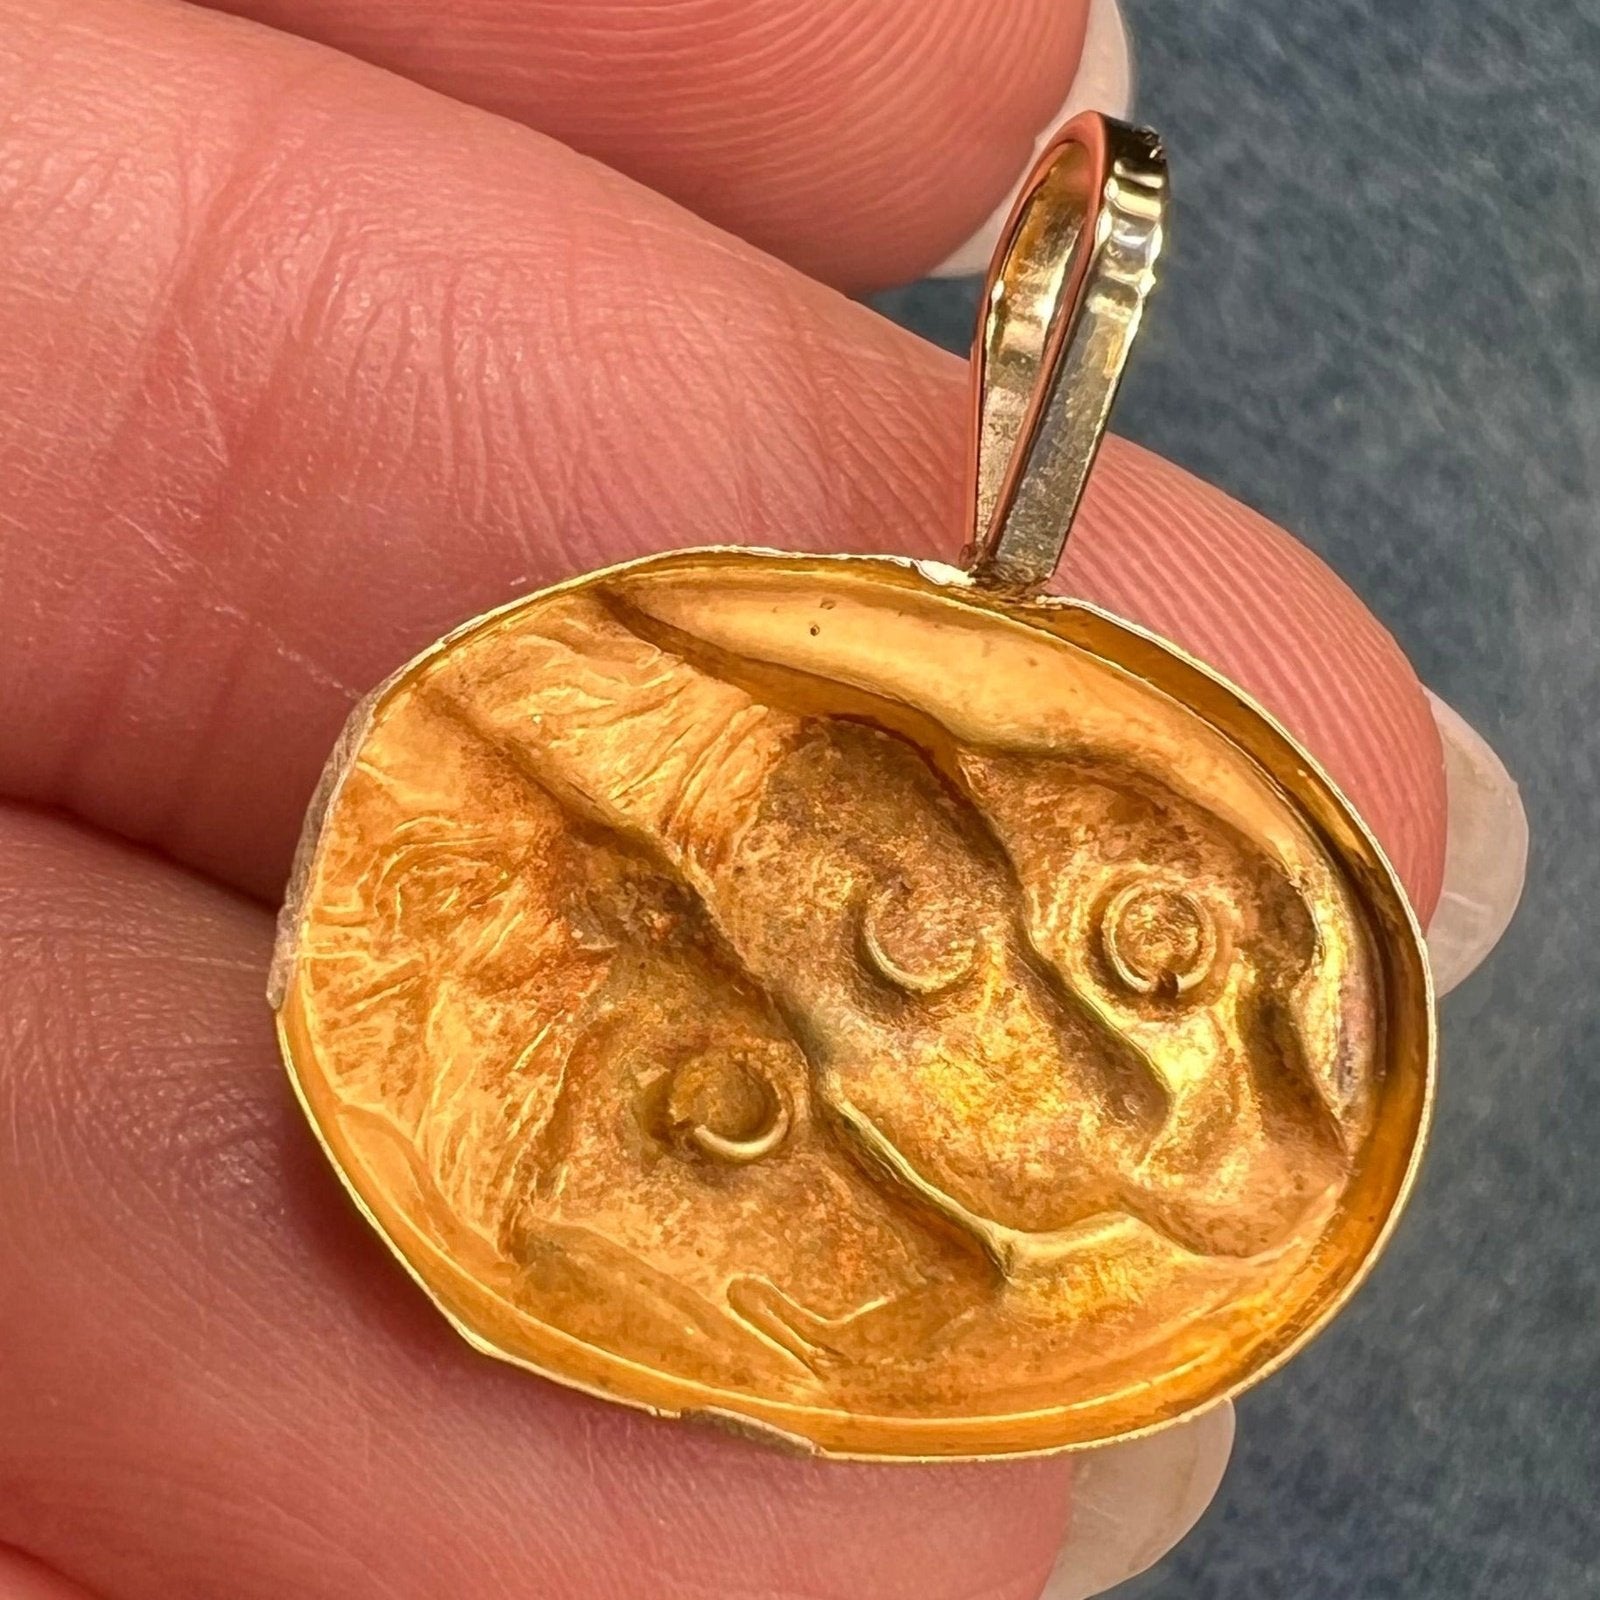 10k Yellow Gold Repousse 3 Hunting Hound Dogs Pendant. Art Nouveau